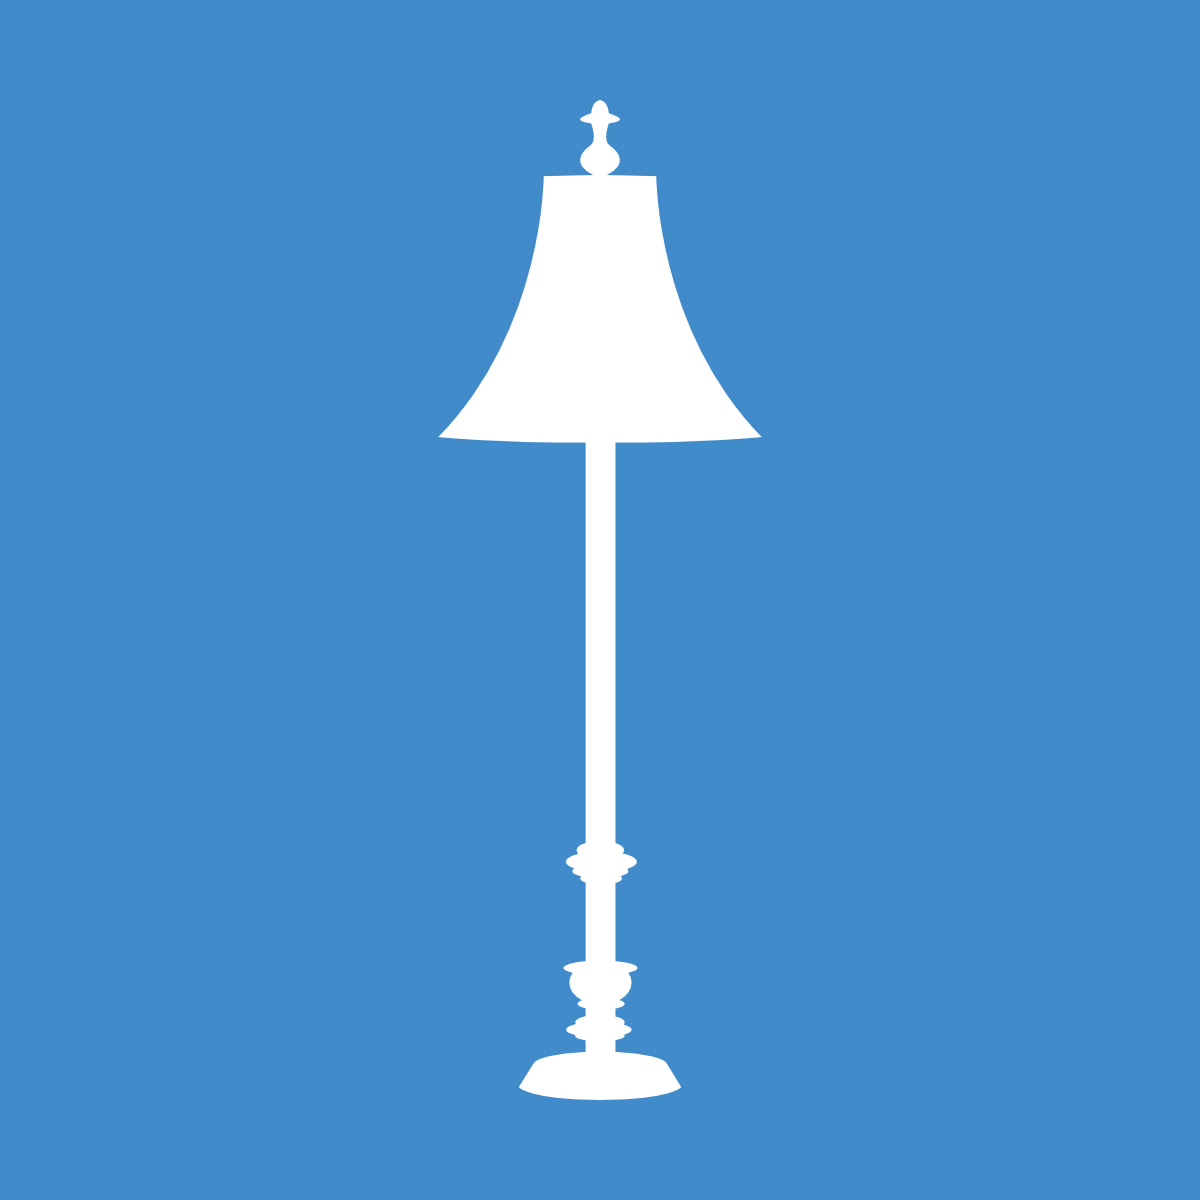 Lamp Buying Guide - How to pick the right lamp & shade